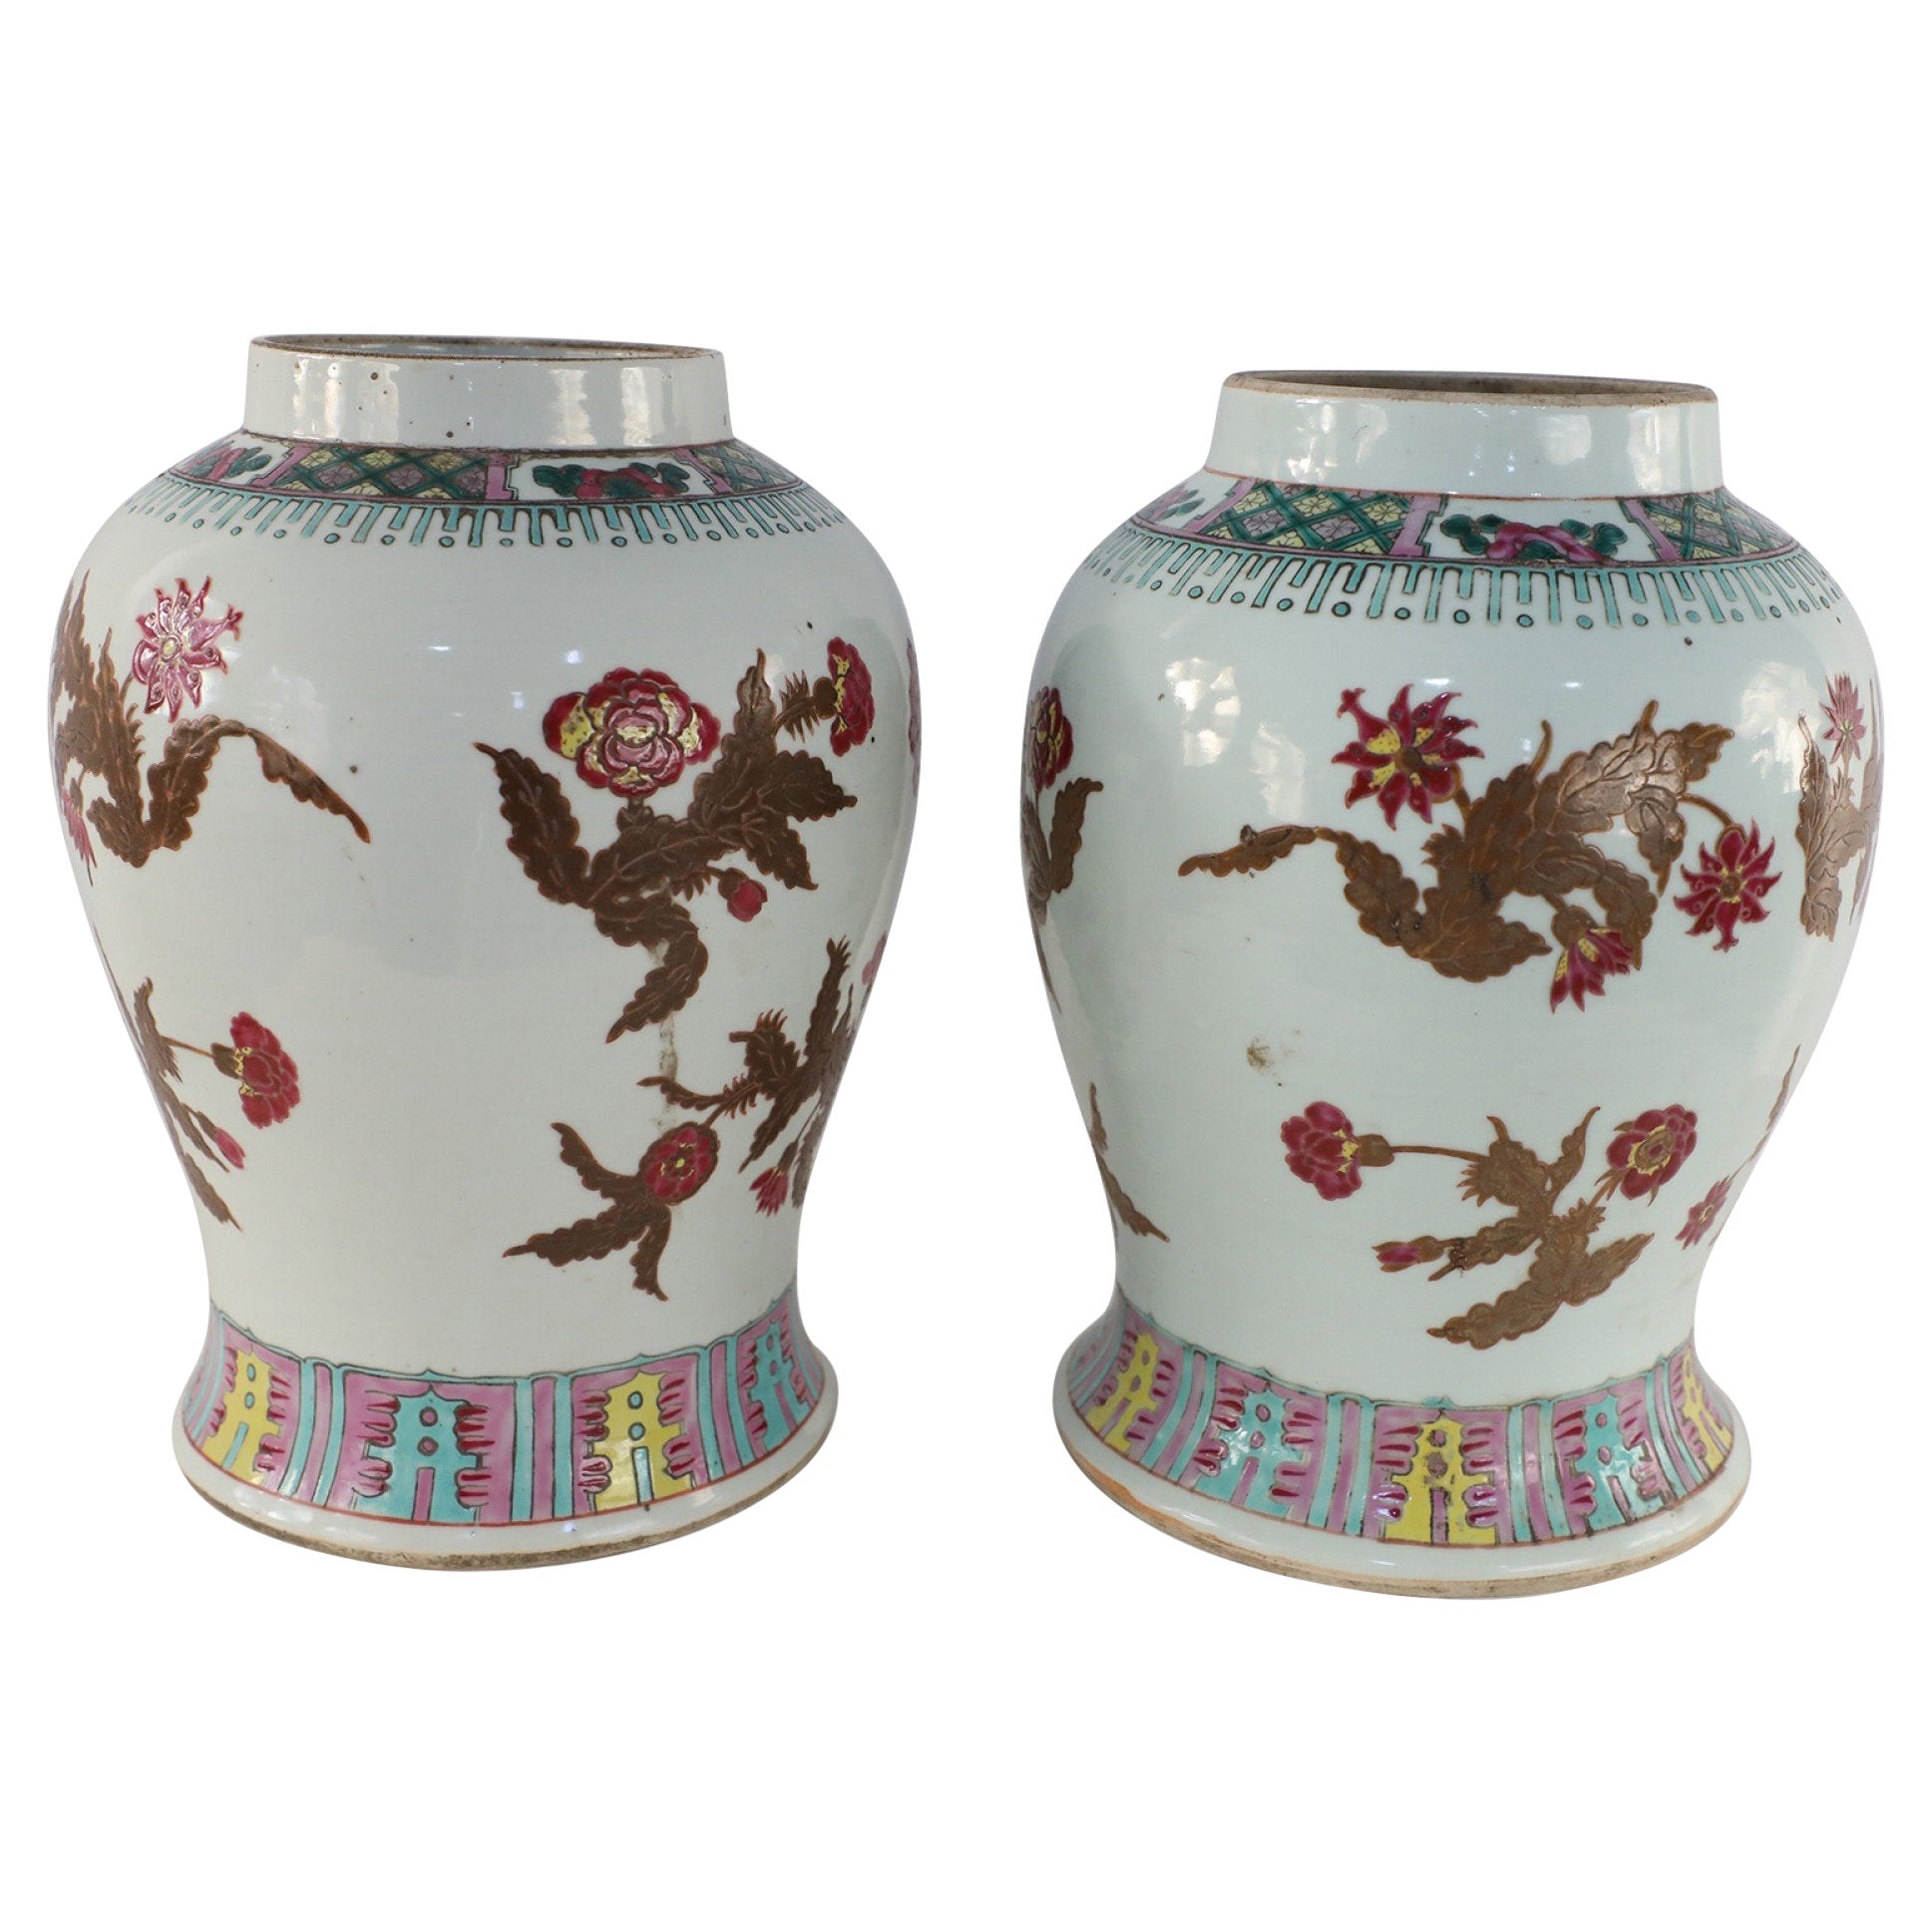 Pair of Chinese White and Umber Floral Design Porcelain Vases For Sale